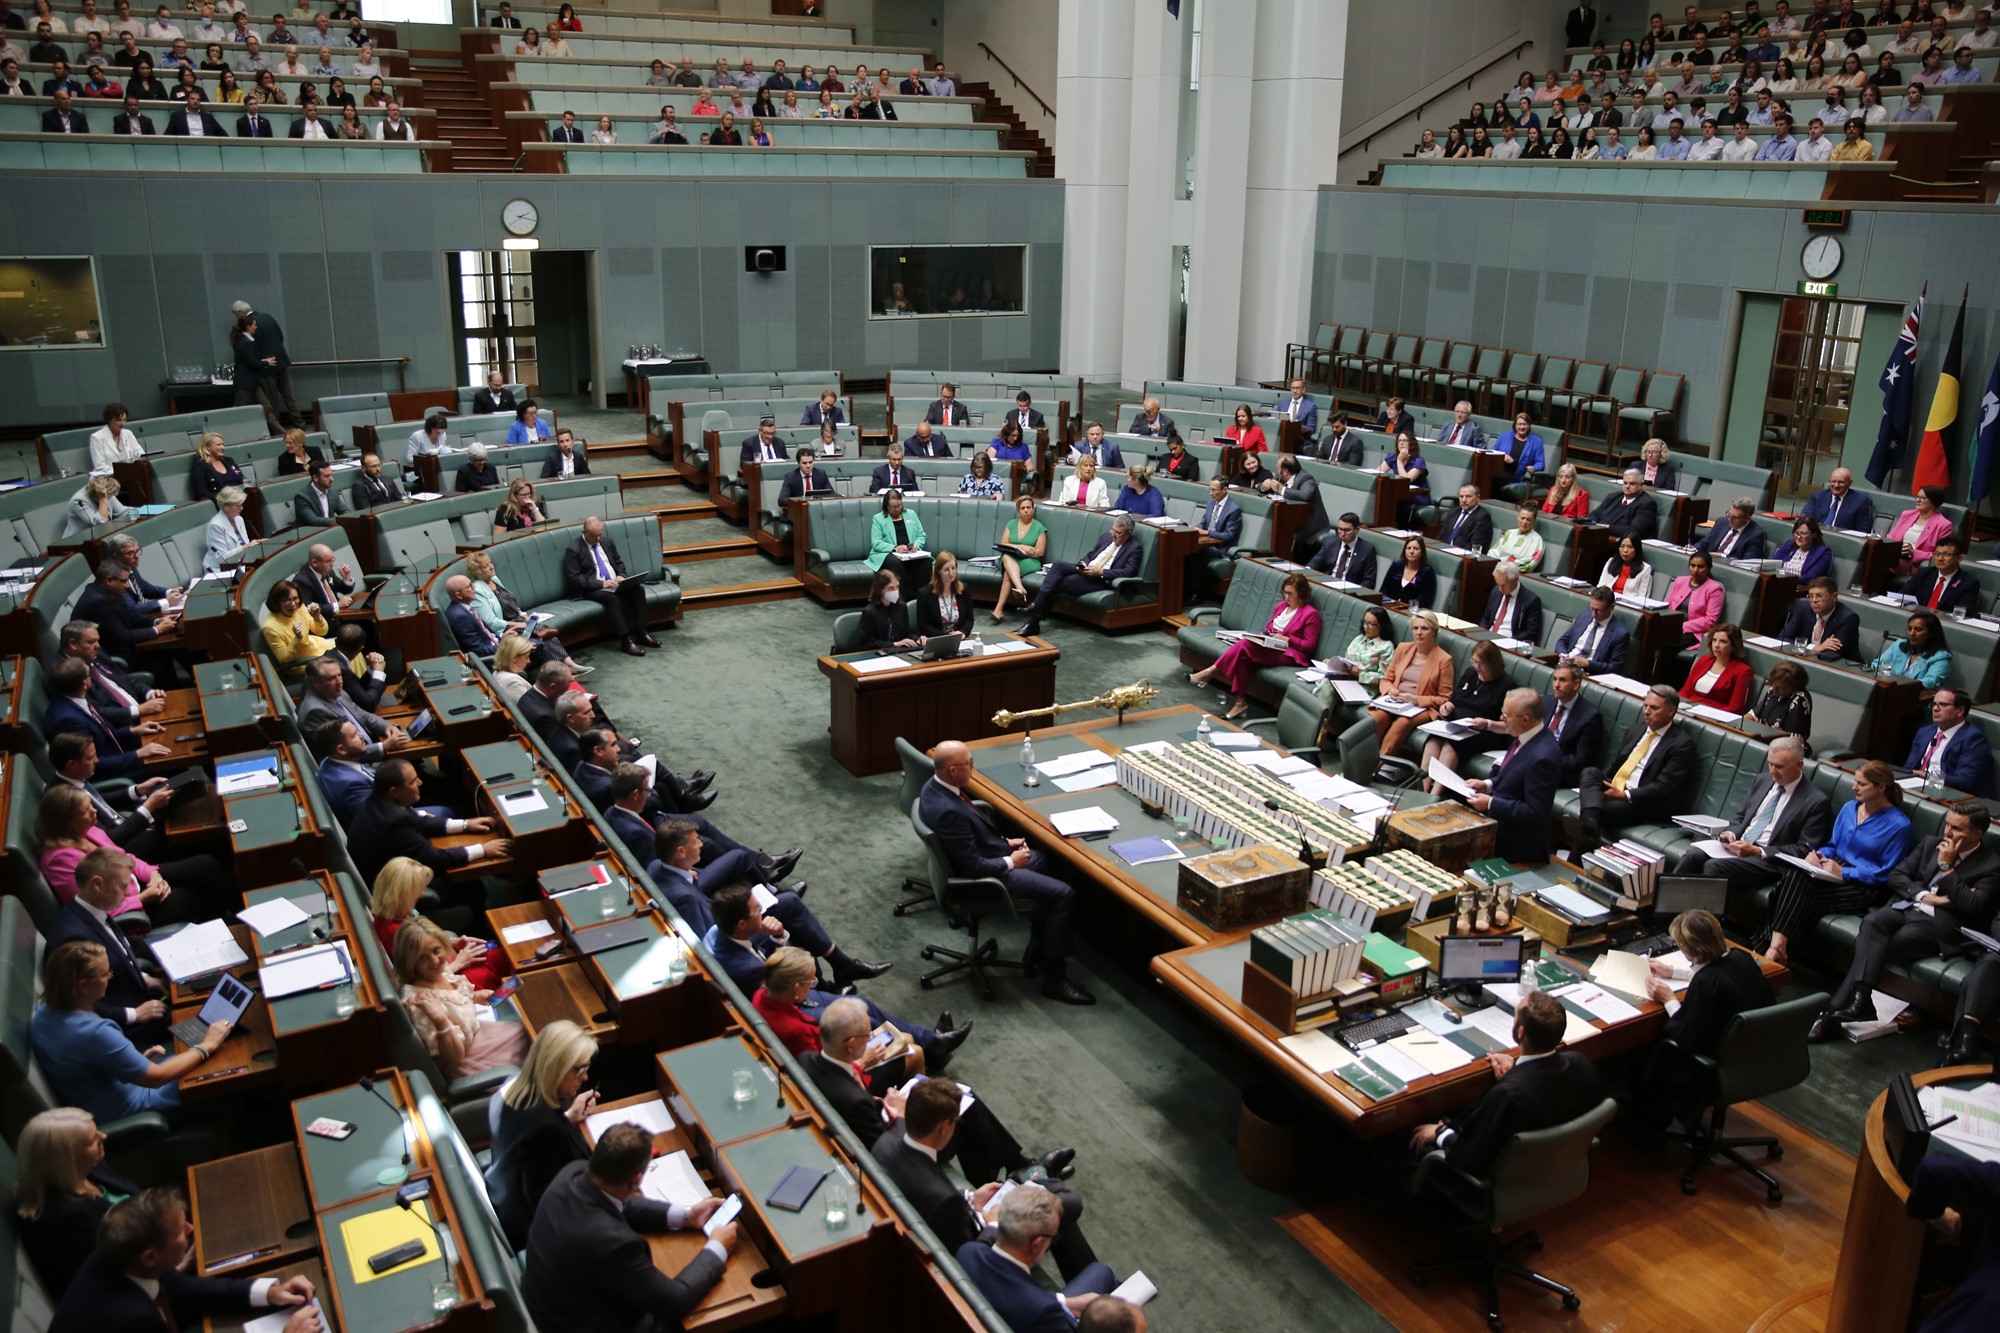 A wide shot of a crowded parliament house of representatives